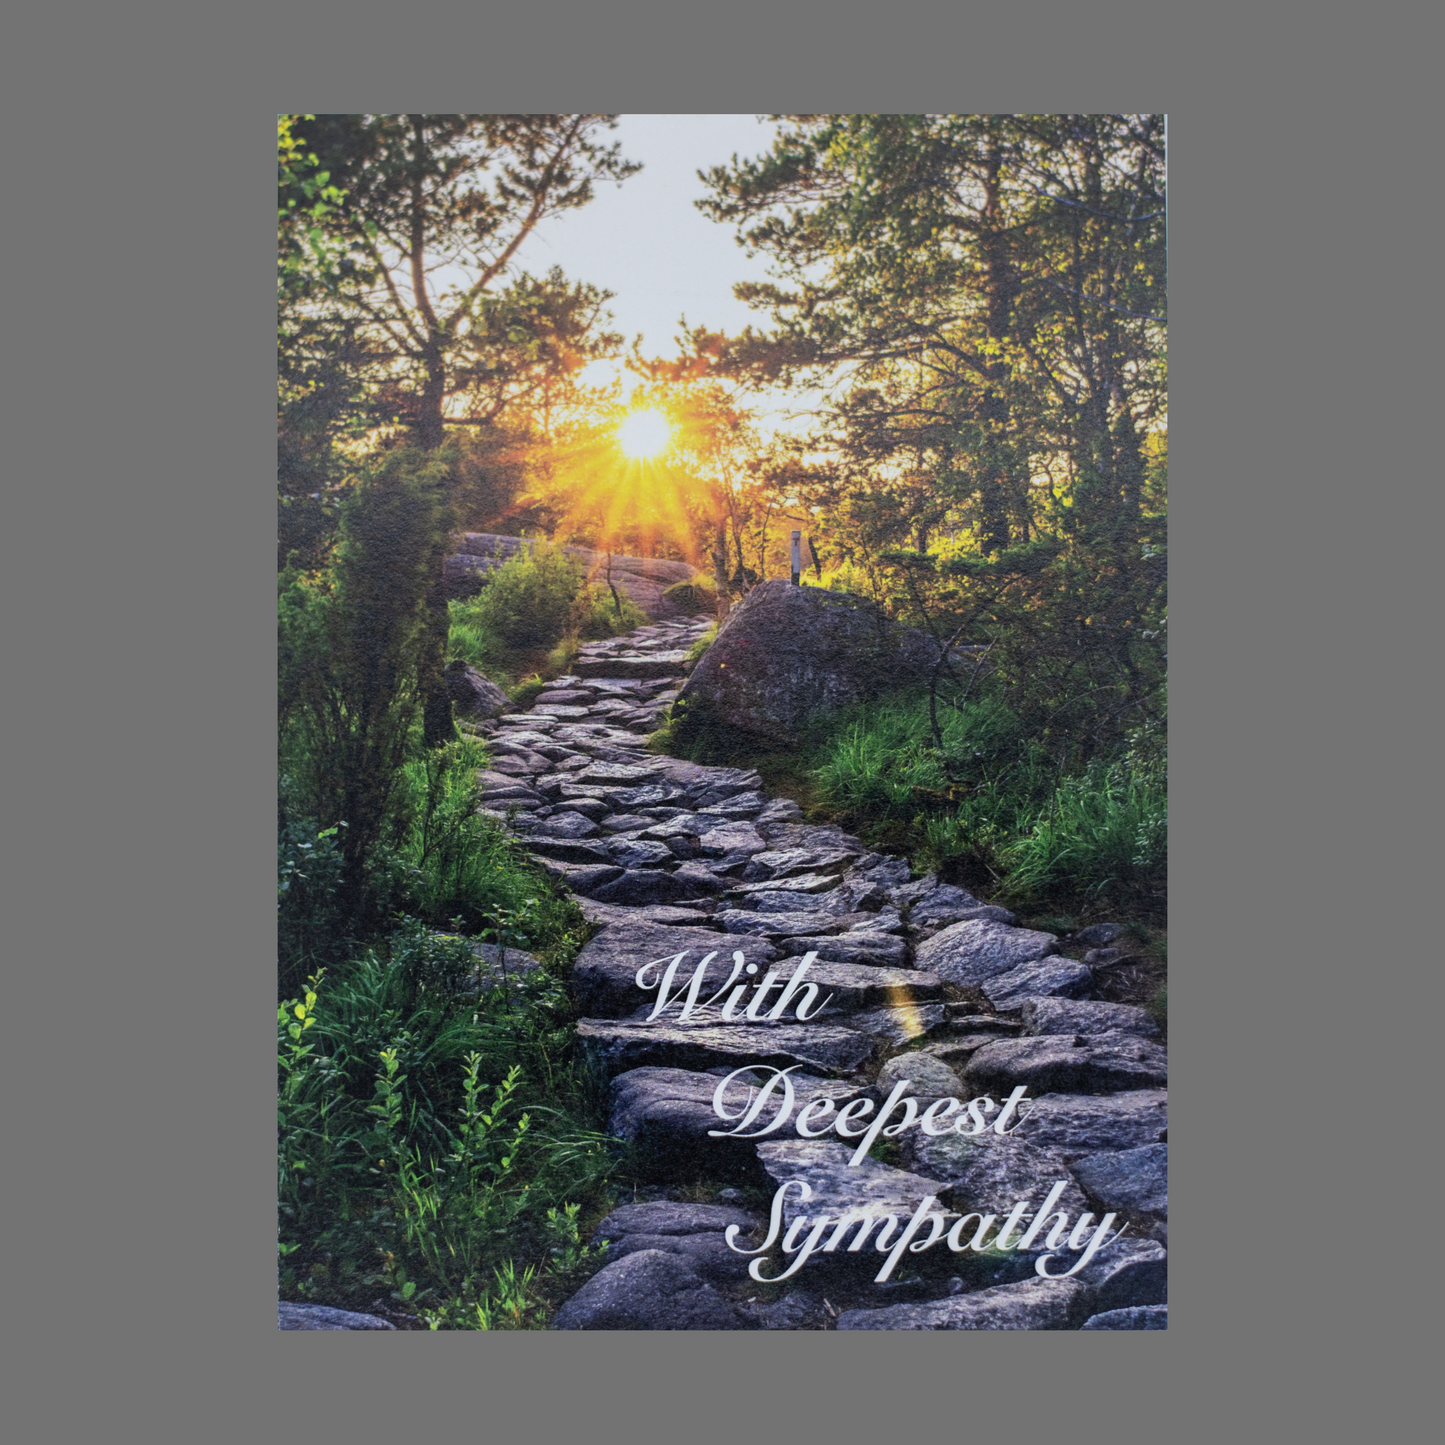 Pack of 4 - "With Deepest Sympathy" with Stone Path (20060)